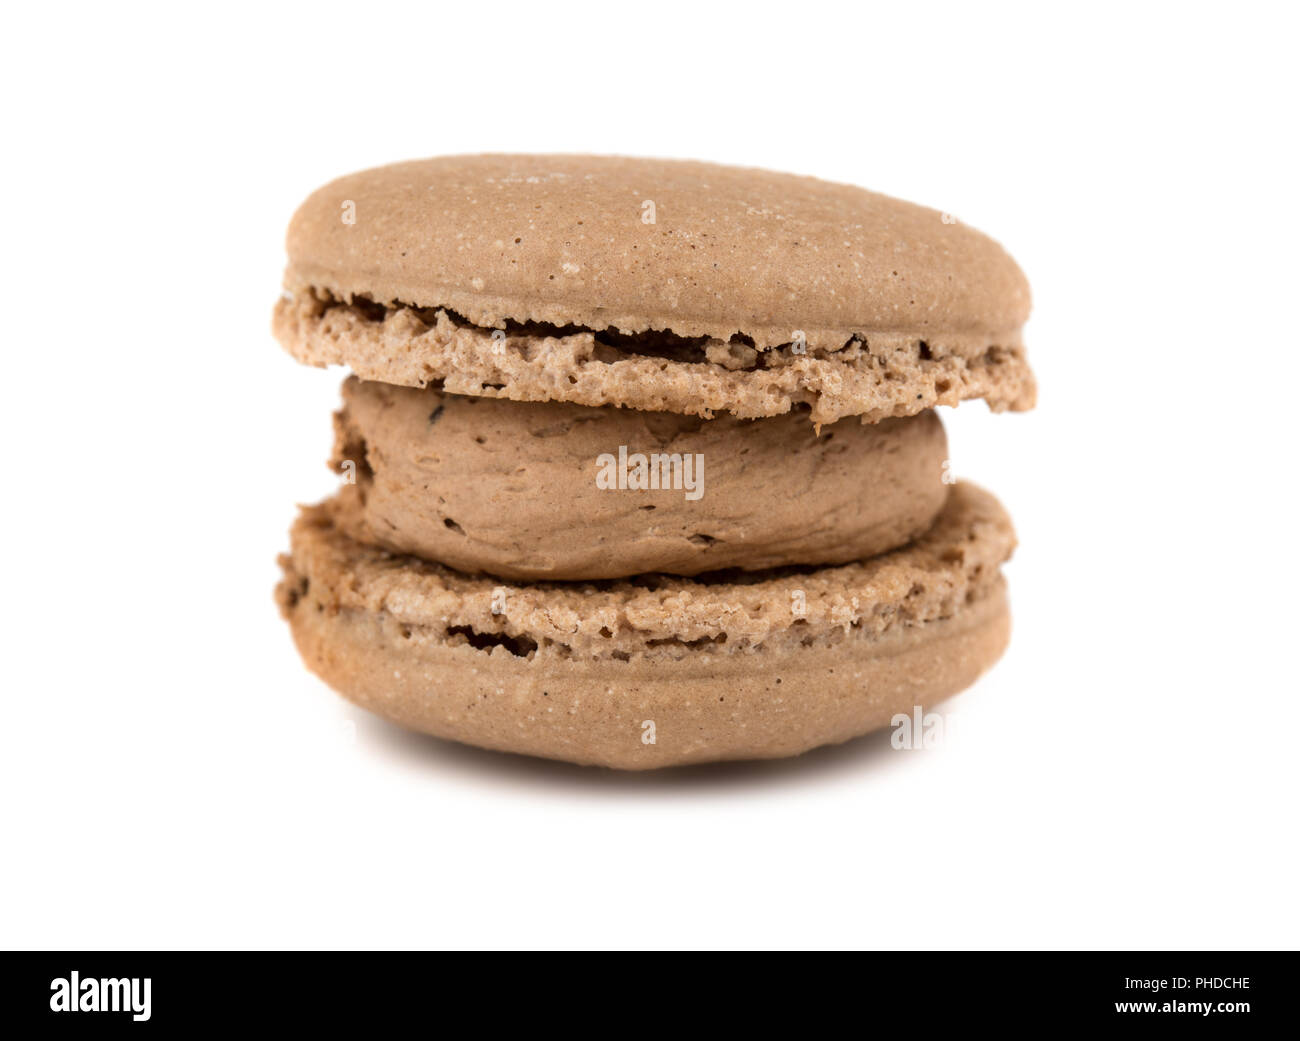 Brown french macaroon cookie Stock Photo